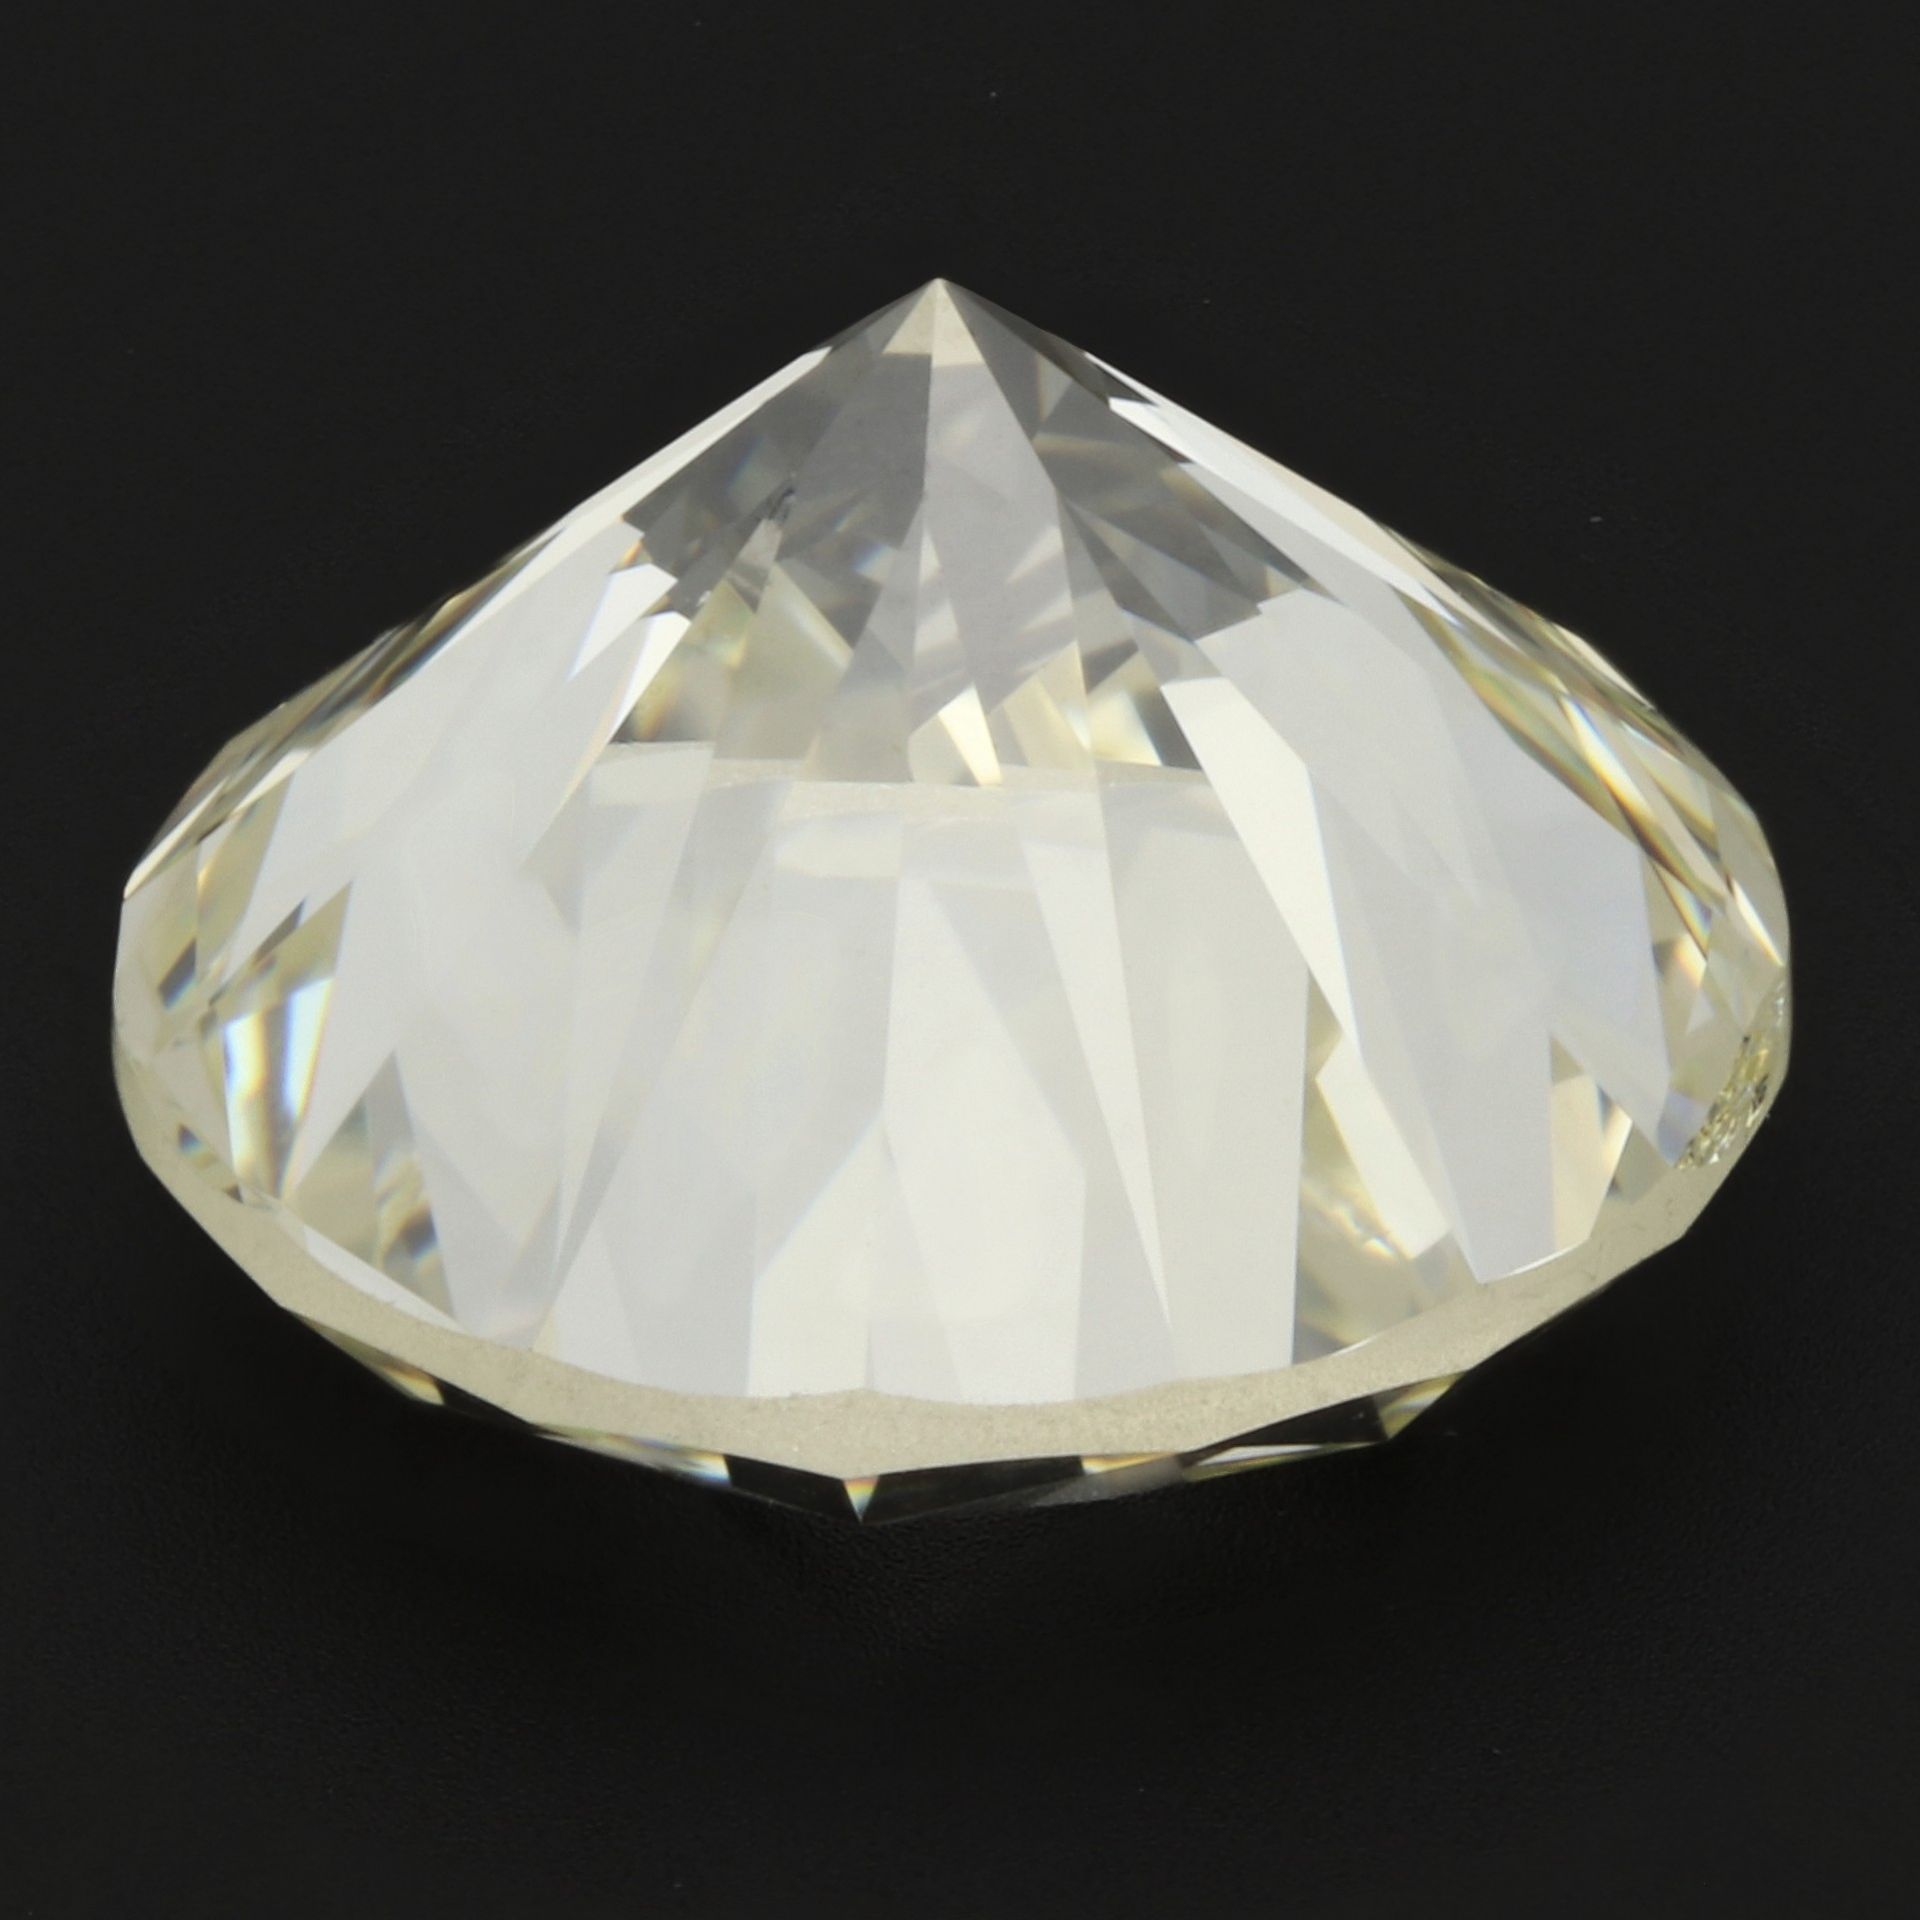 No Reserve - 3.01 ct. HRD-certified natural diamond. - Image 3 of 4